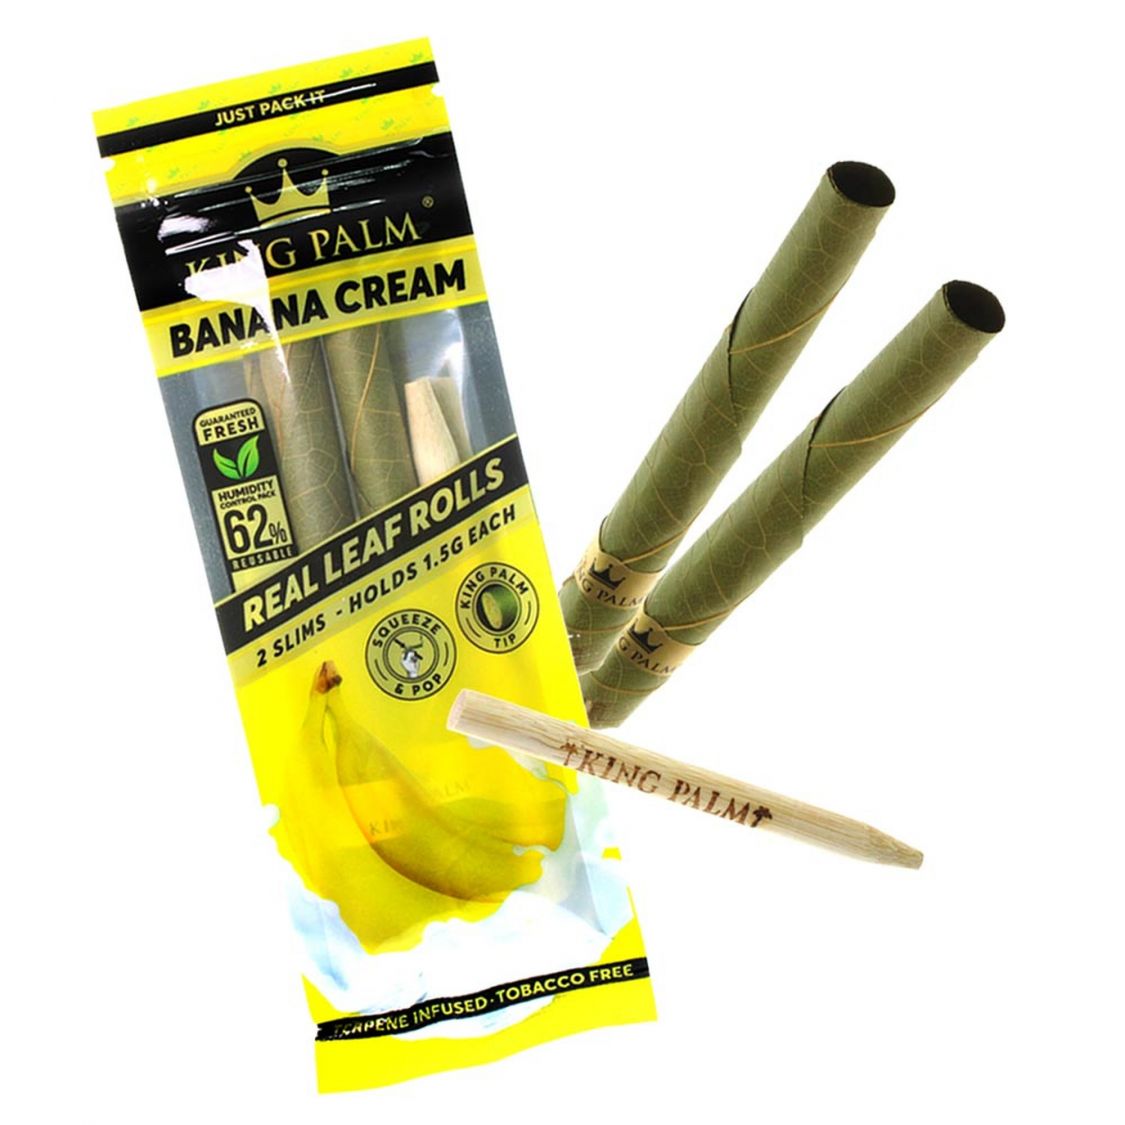 KING PALM KING PALM BANANA CREAM Accessories Paper / Rolling Supplies